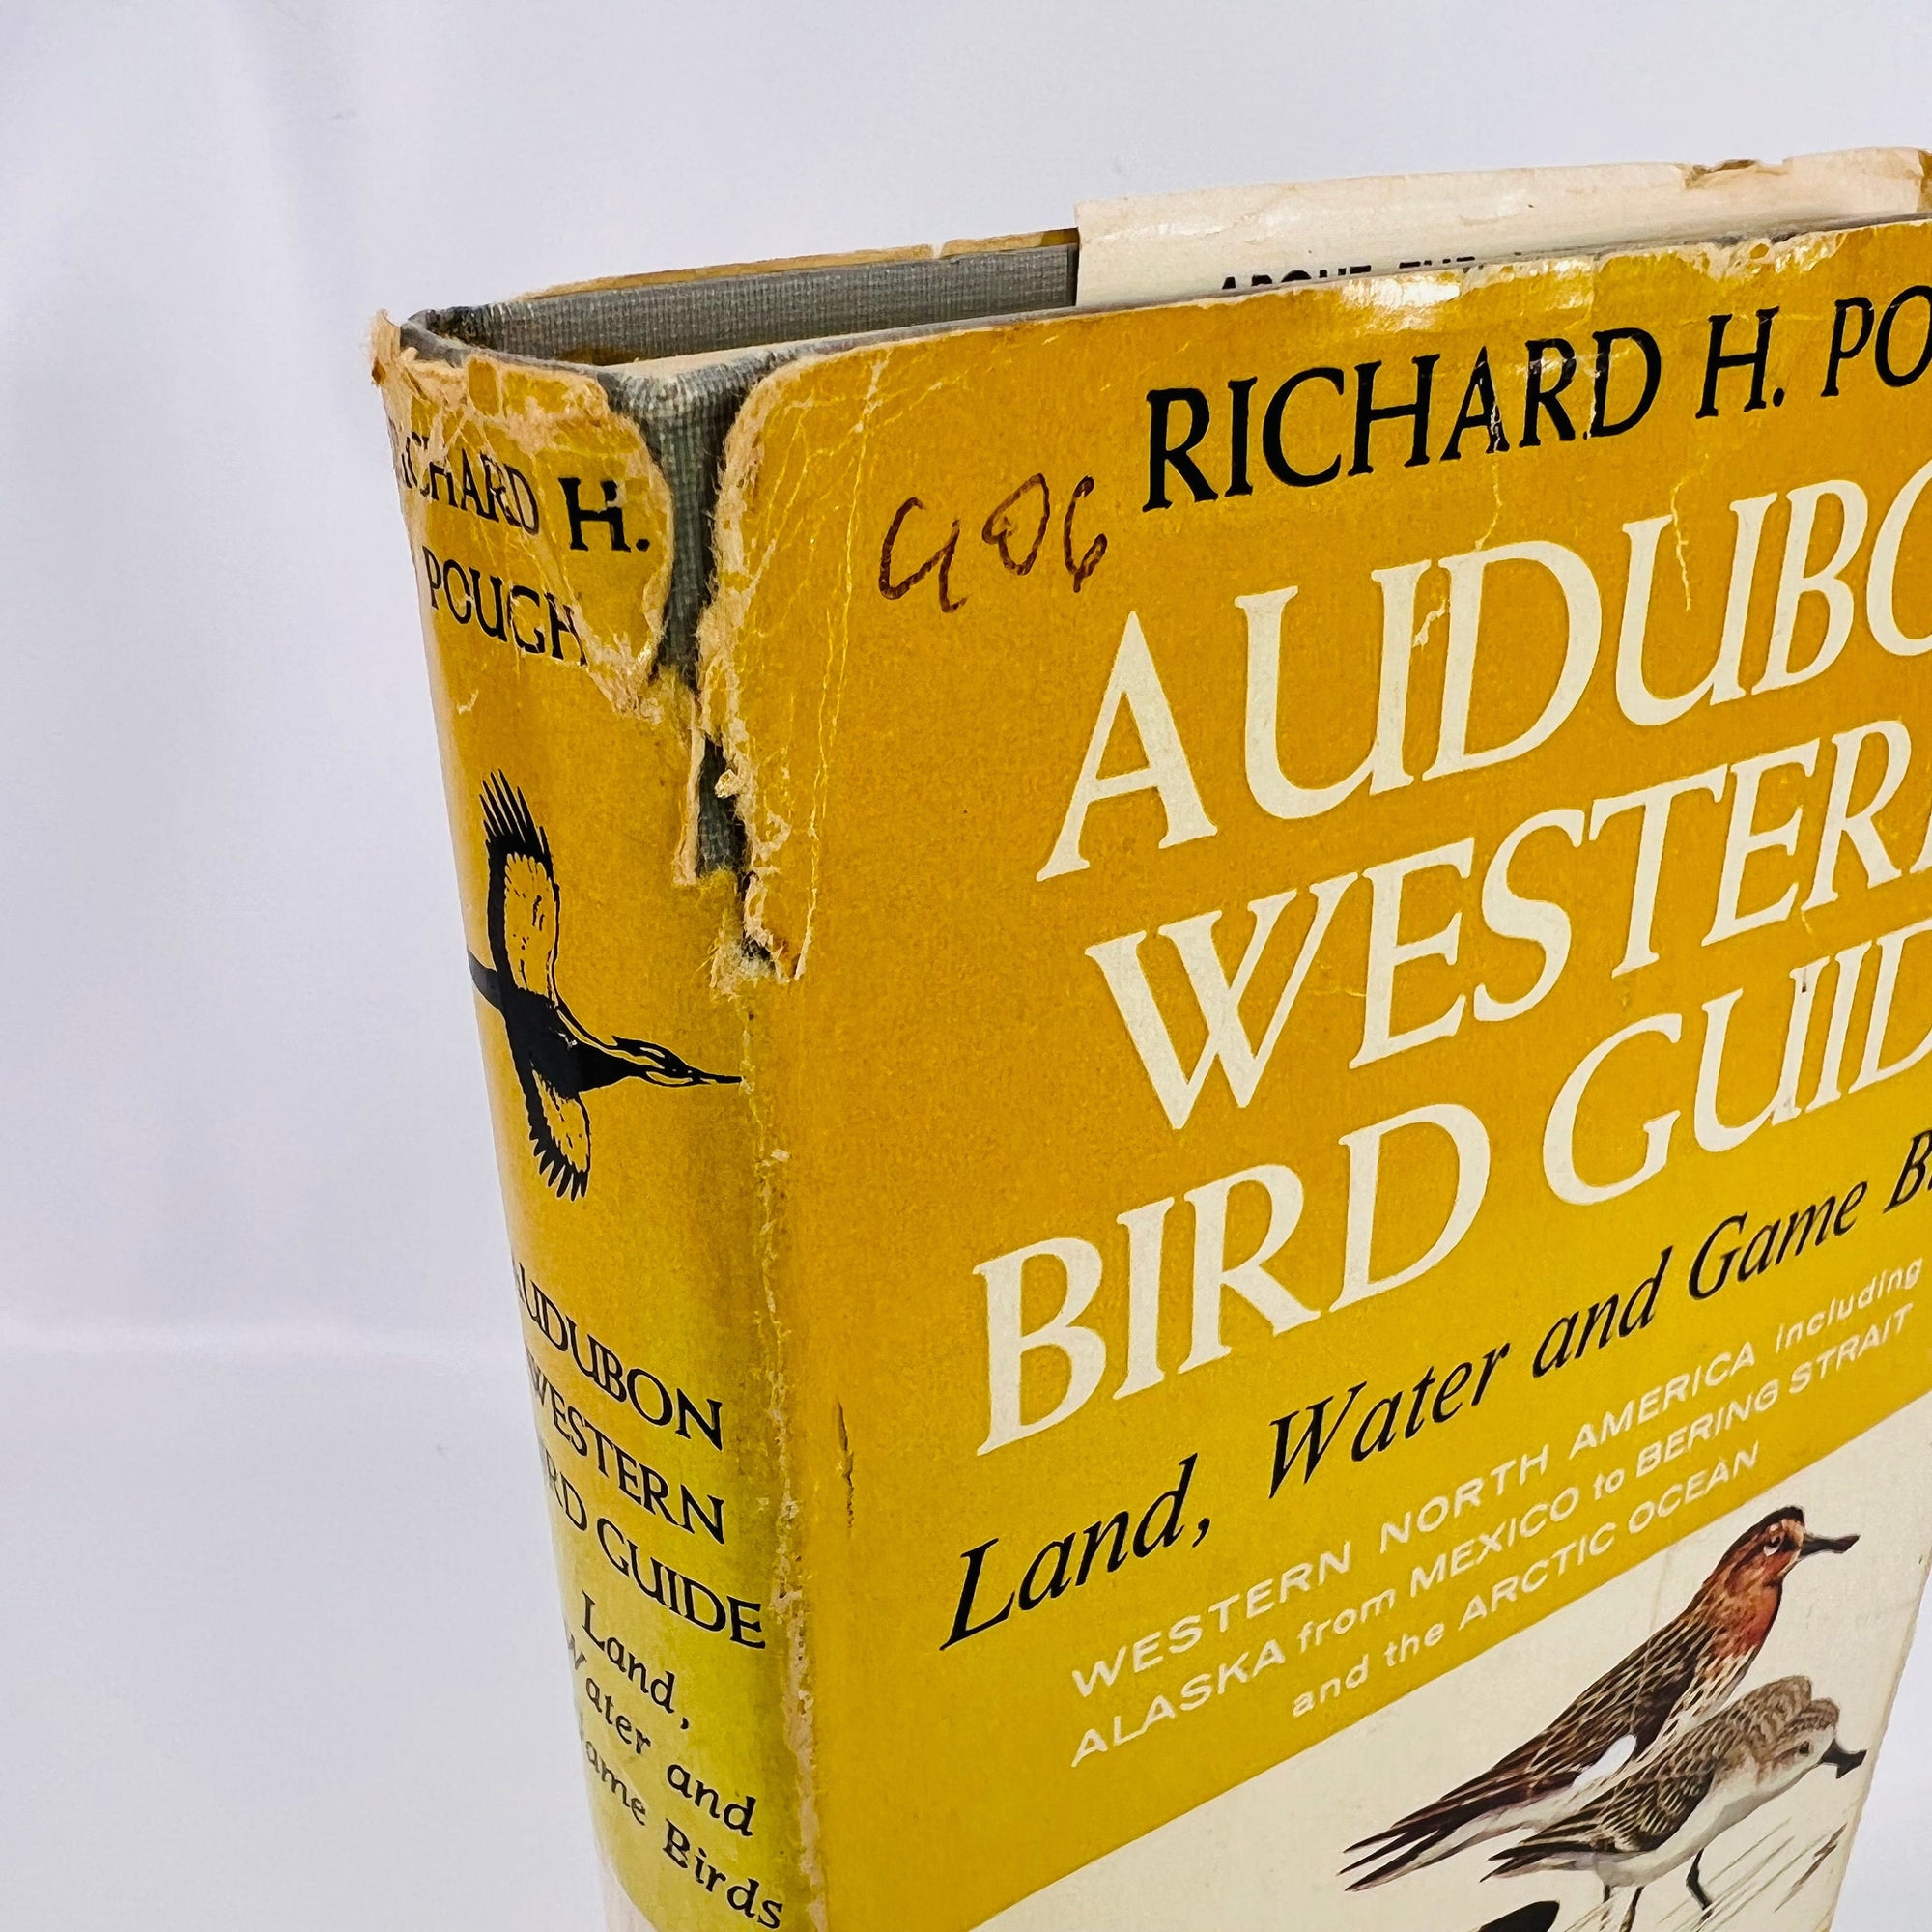 Audubon Western Bird Guide Land Water and Game Birds of Western North America from Mexico to the Arctic Ocean by Richard H. Pough 1957